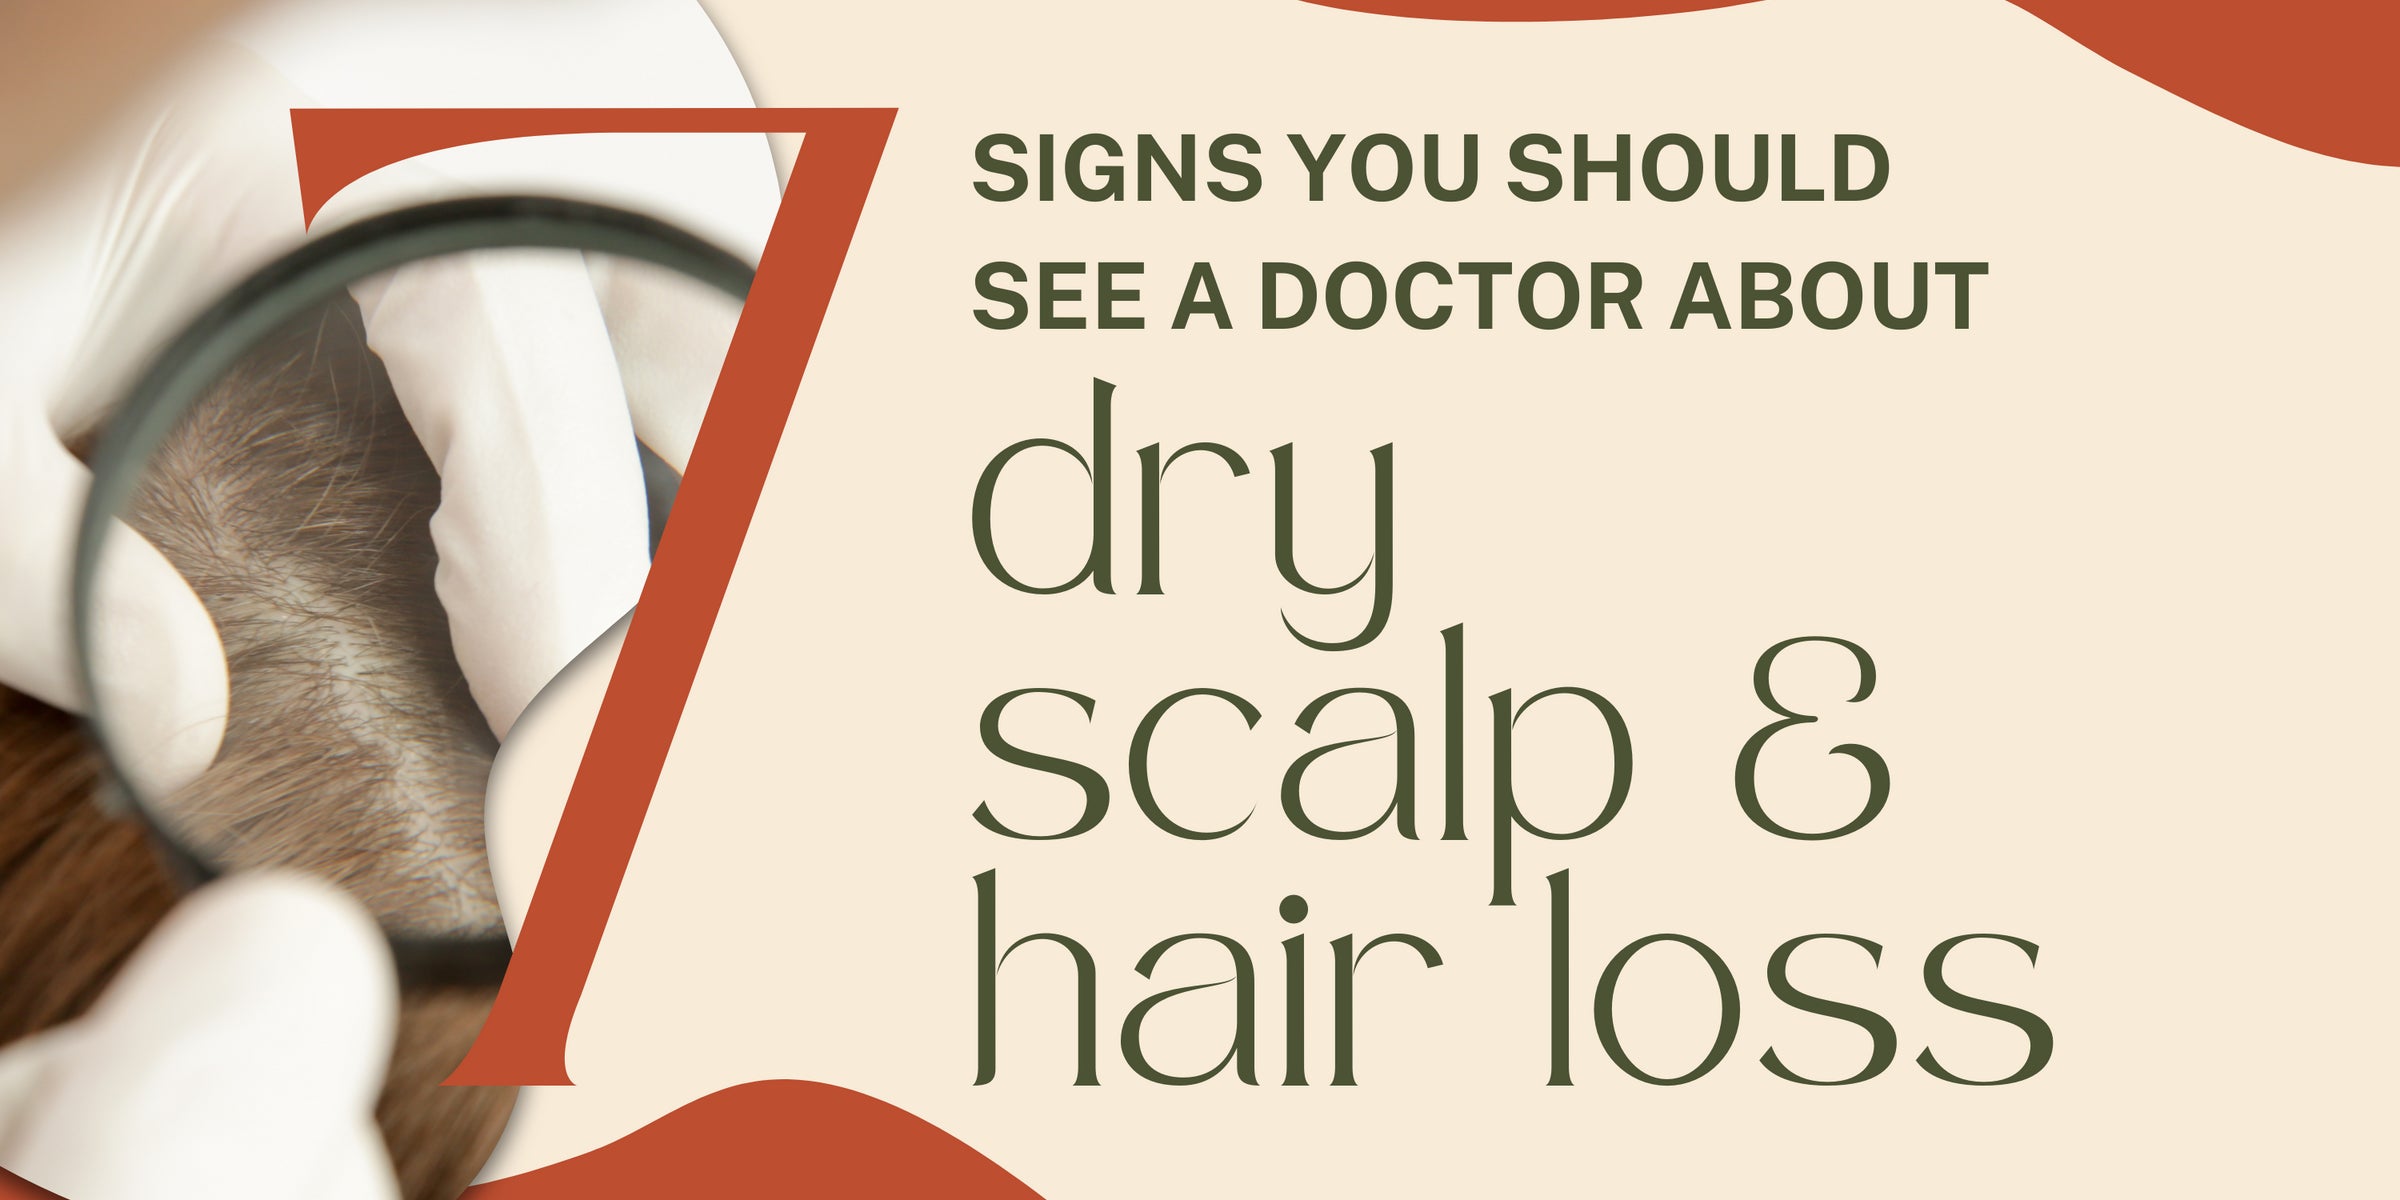 7 Signs You Should See a Doctor About Your Dry Scalp & Hair Loss